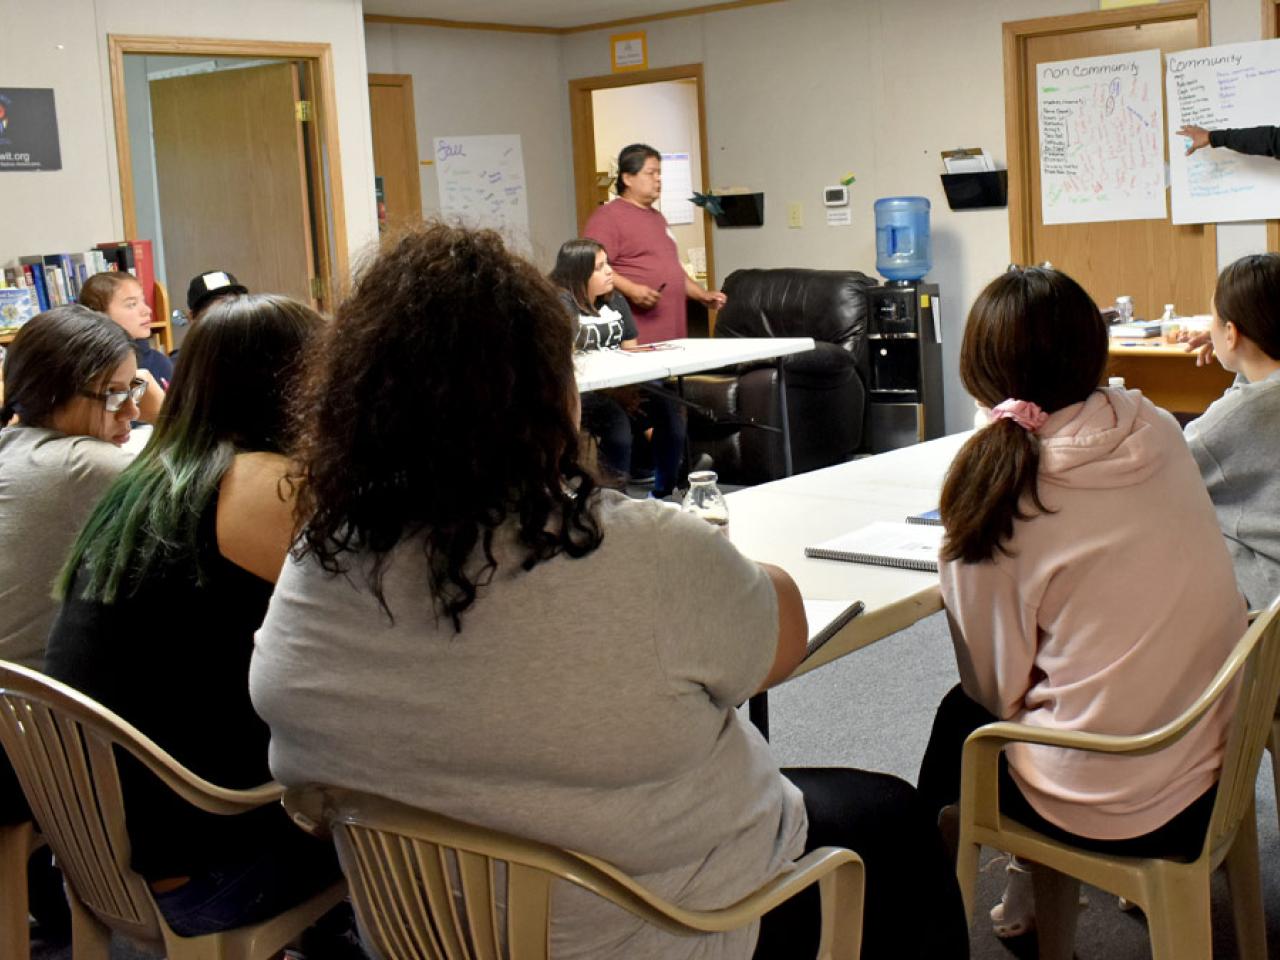 The Warm Springs Community Action Team offers financial skills and workforce training and small business coaching and counseling to youth and adults residing on the Warm Springs Reservation in north-central Oregon.